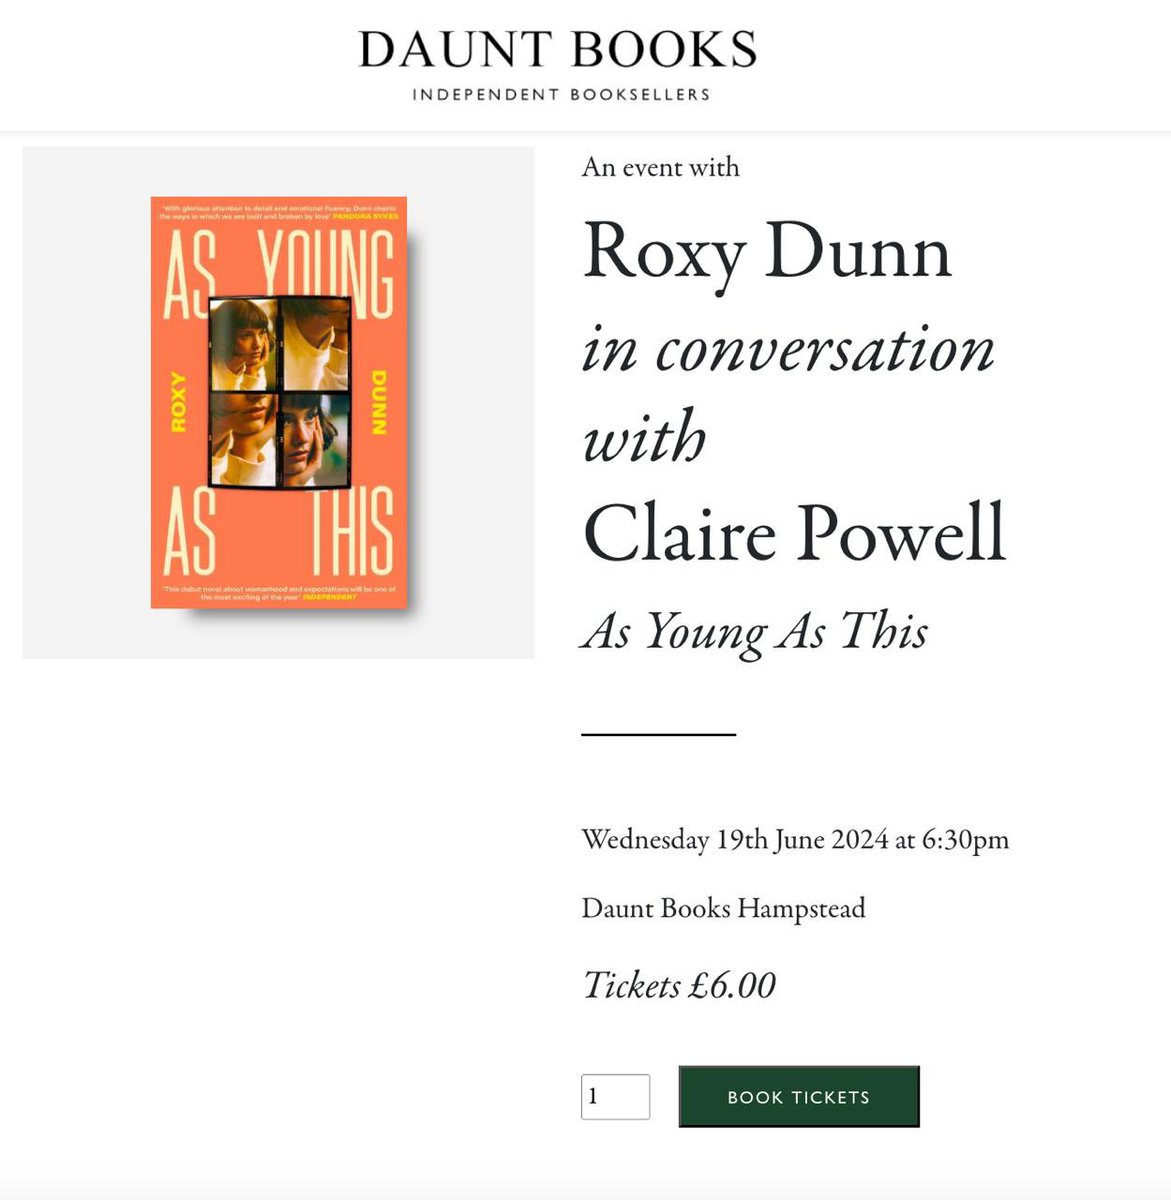 People! I’m doing another in-person event - this time @Dauntbooks Hampstead (oh so classy) Please come 🙏 Link in bio